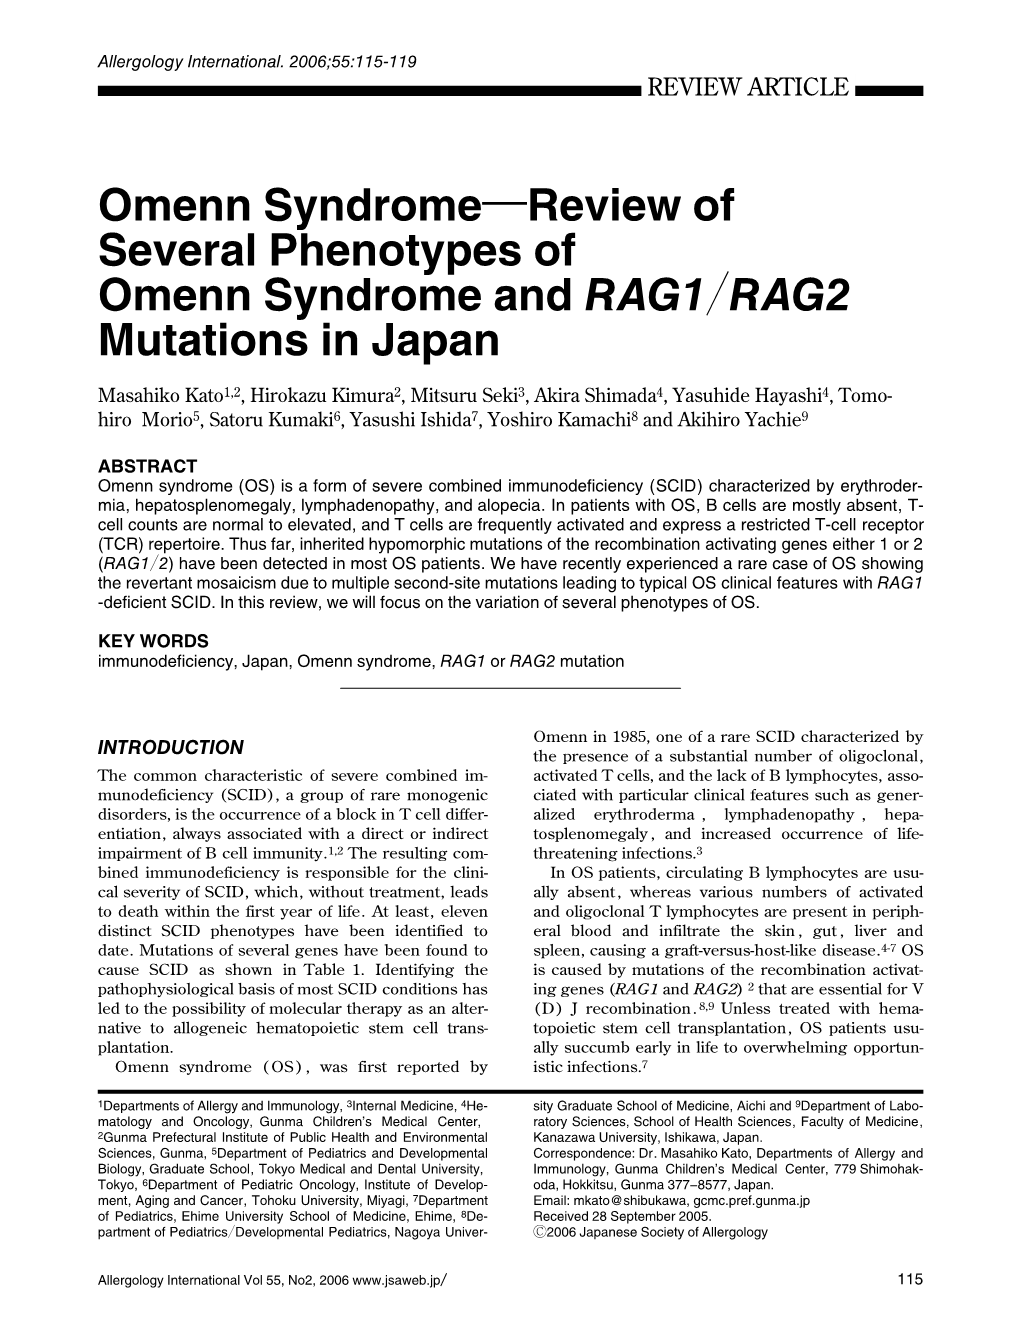 Review of Several Phenotypes of Omenn Syndrome and RAG1/RAG2